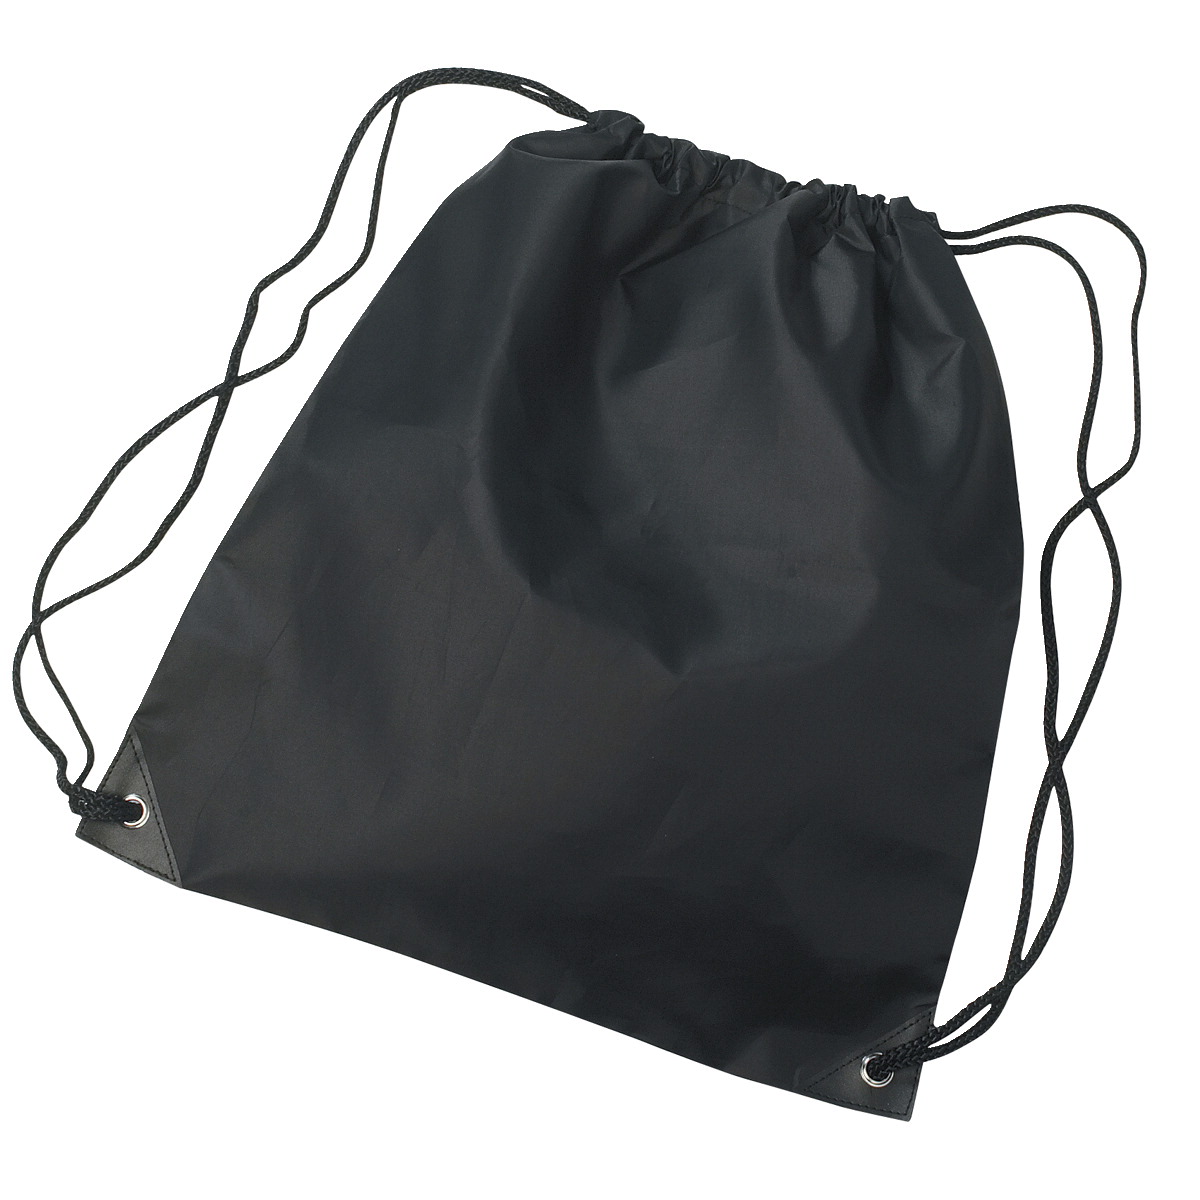 14 X 18 In. Sports Pack, Polyester & Leather - Black